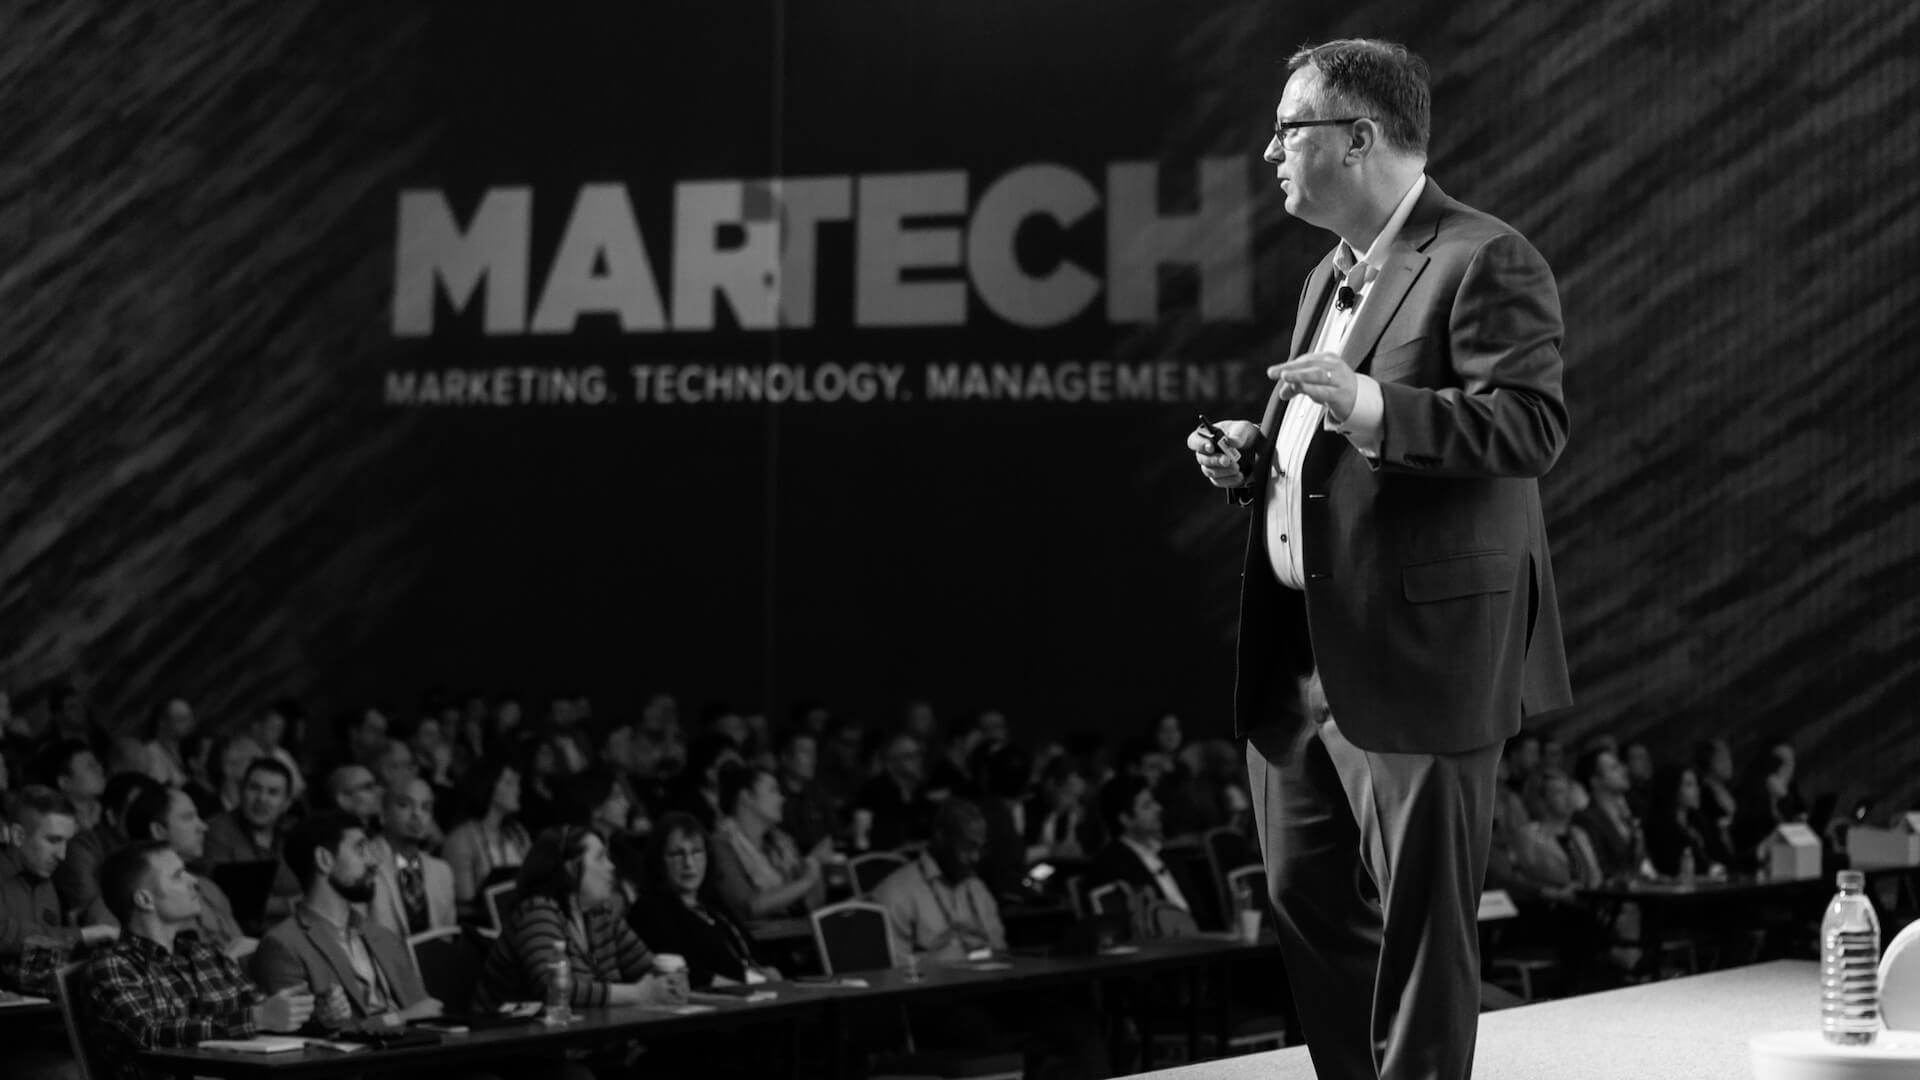 Attend MarTech for free… see what you get!